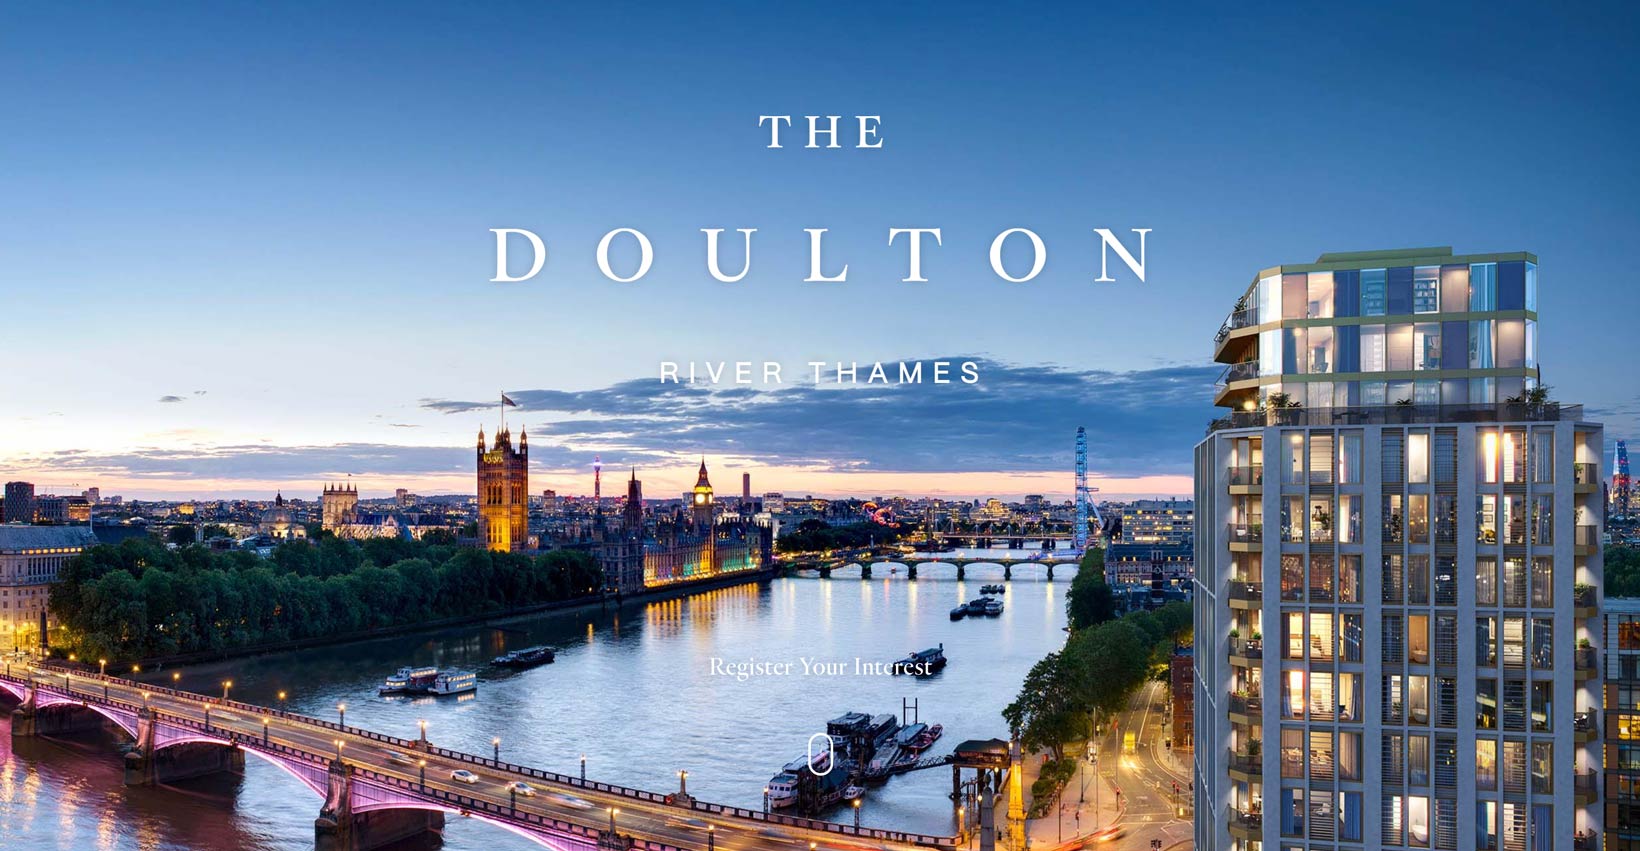 Register your interest in the new homes at The Doulton